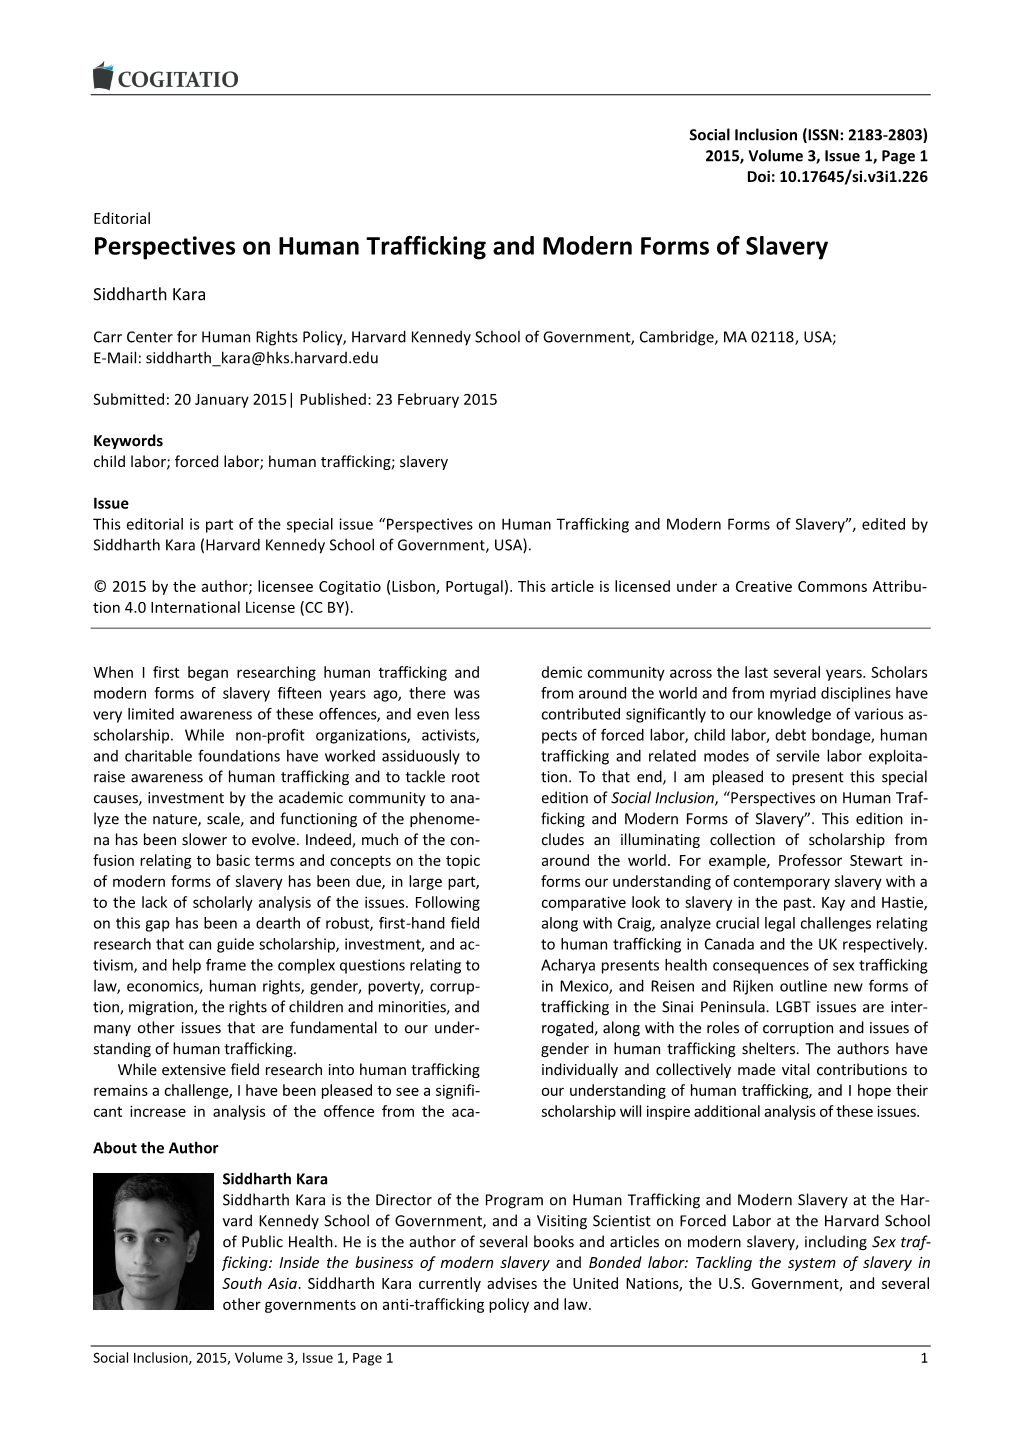 Perspectives on Human Trafficking and Modern Forms of Slavery